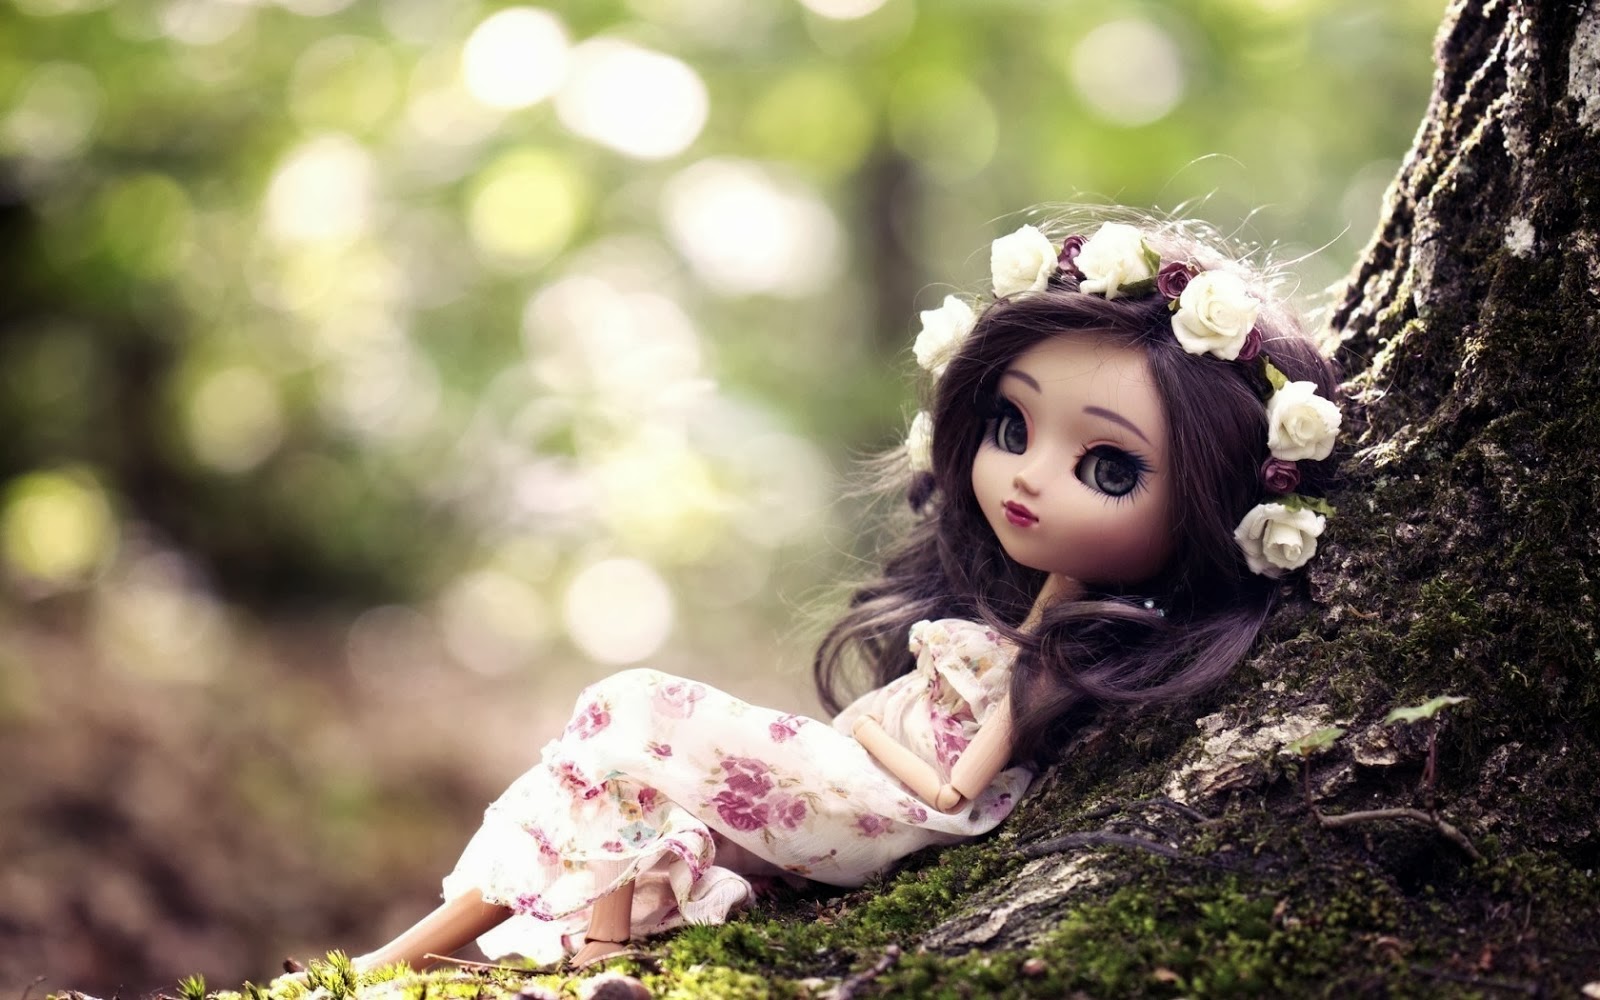 Dolls By Providing HD Wallpaper And Image Of Cute Which Are